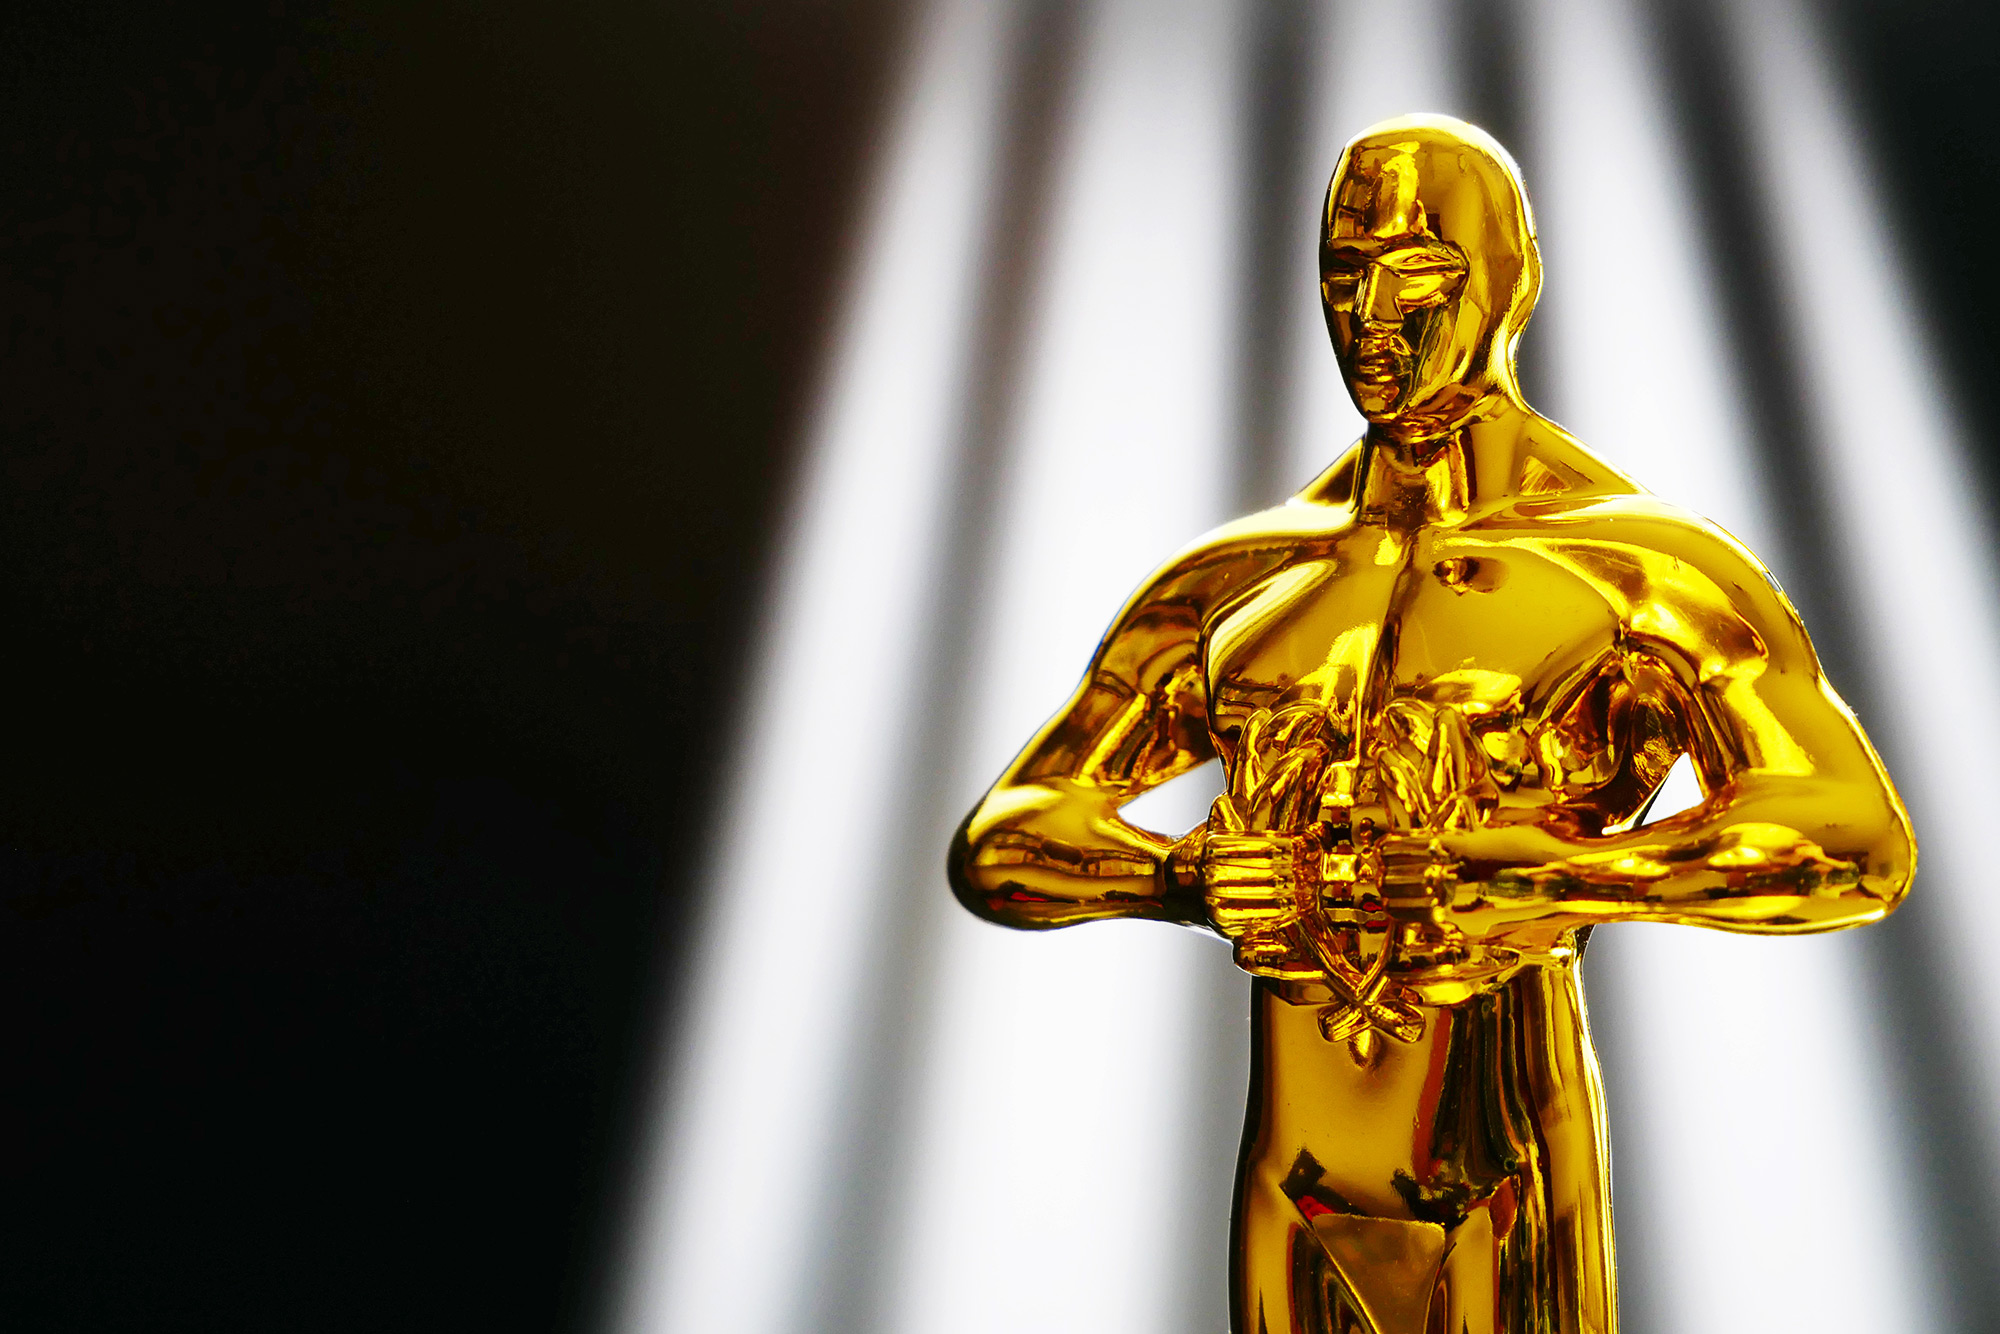 2023 Oscars Live Stream: How to Watch 95th Academy Awards Online Free